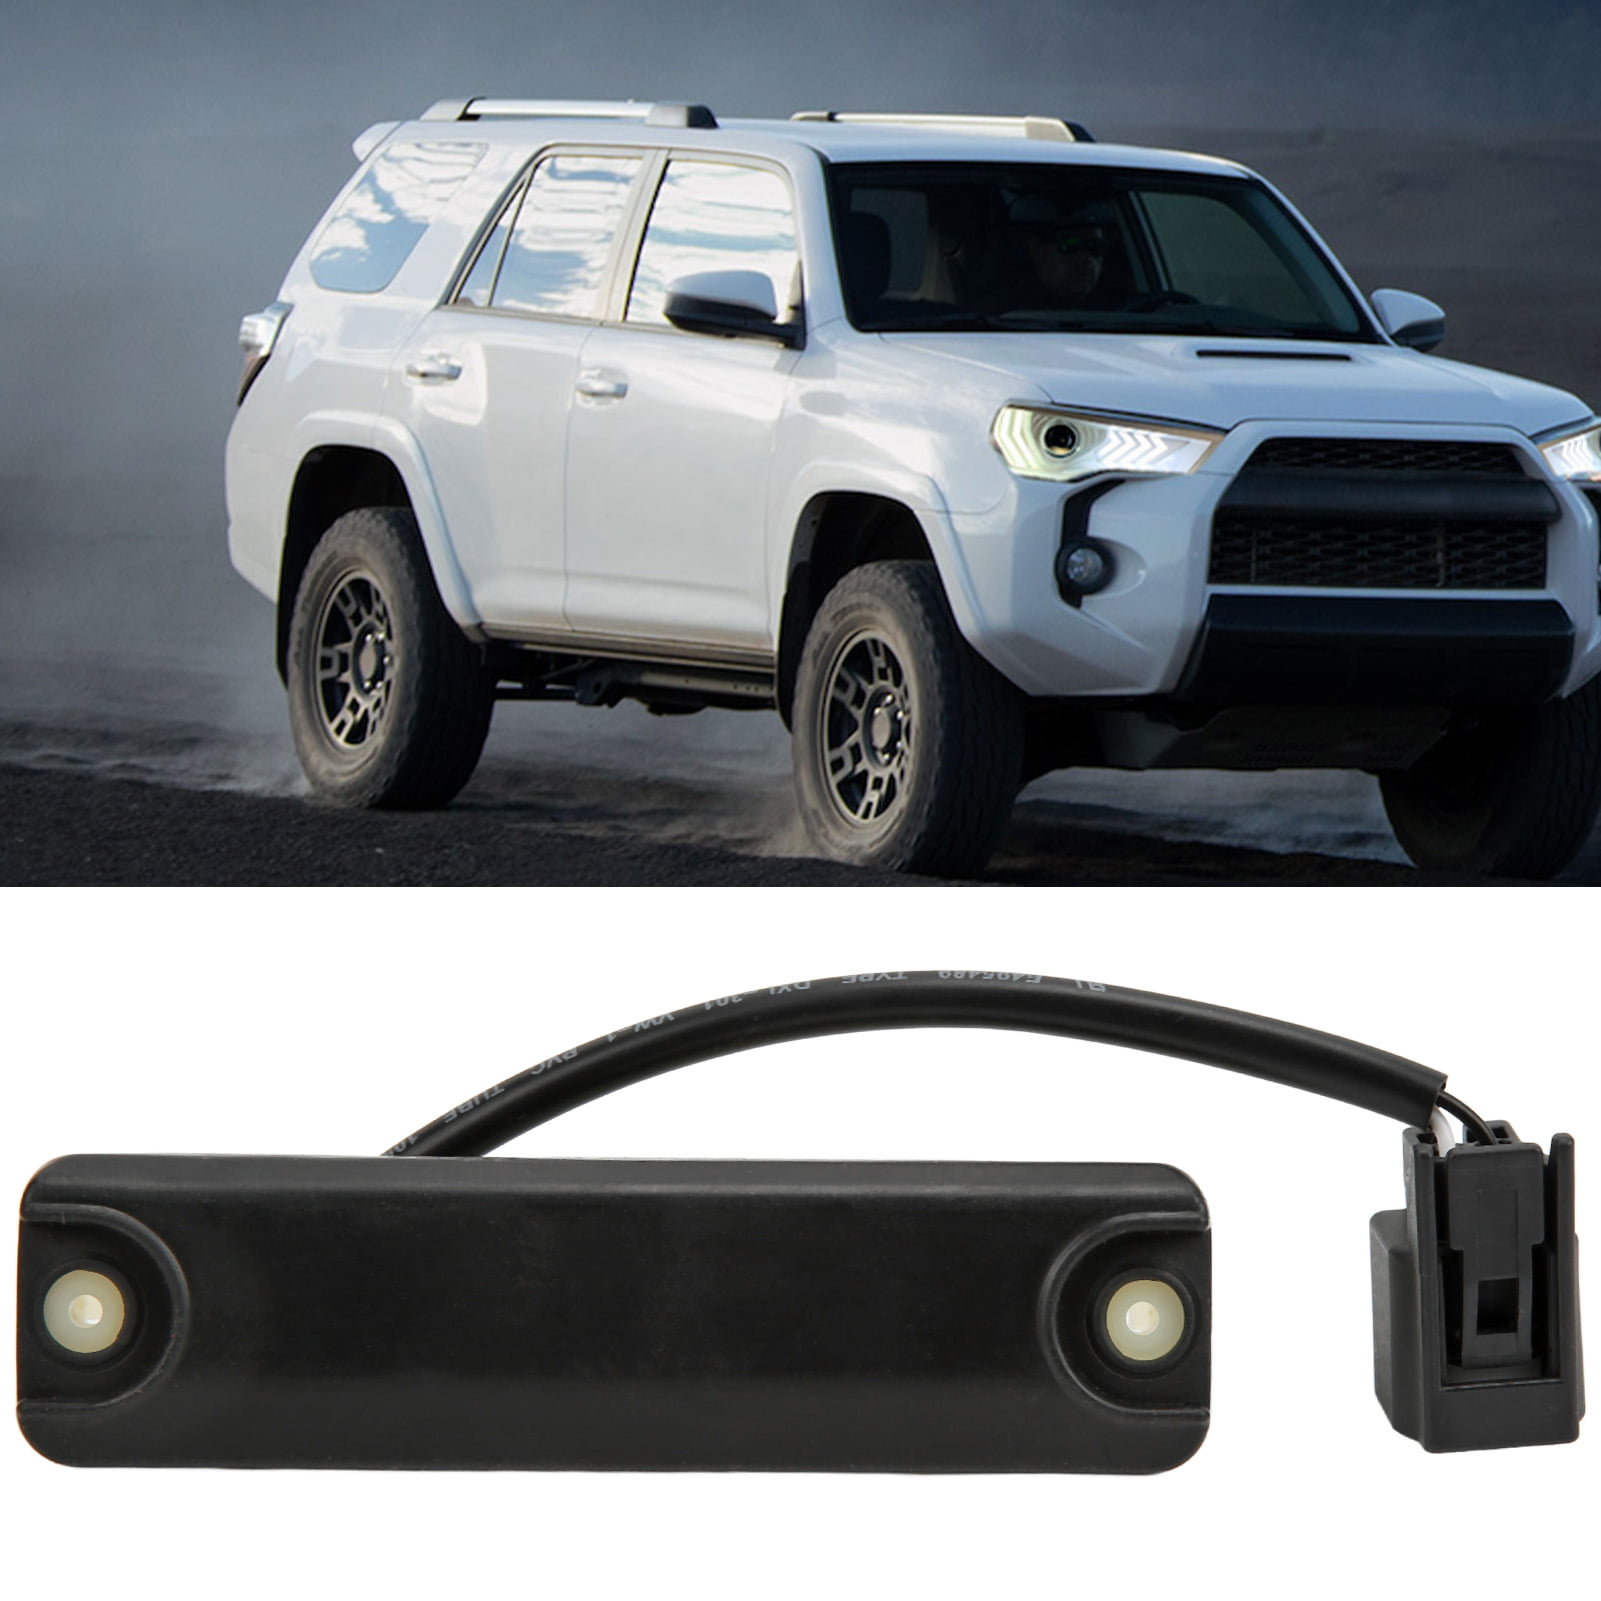 Tailgate Opening Release Switch 84840‑35010 Plug and Play Replacement for 4RUNNER 2003‑2020 Liftgate Release Switch